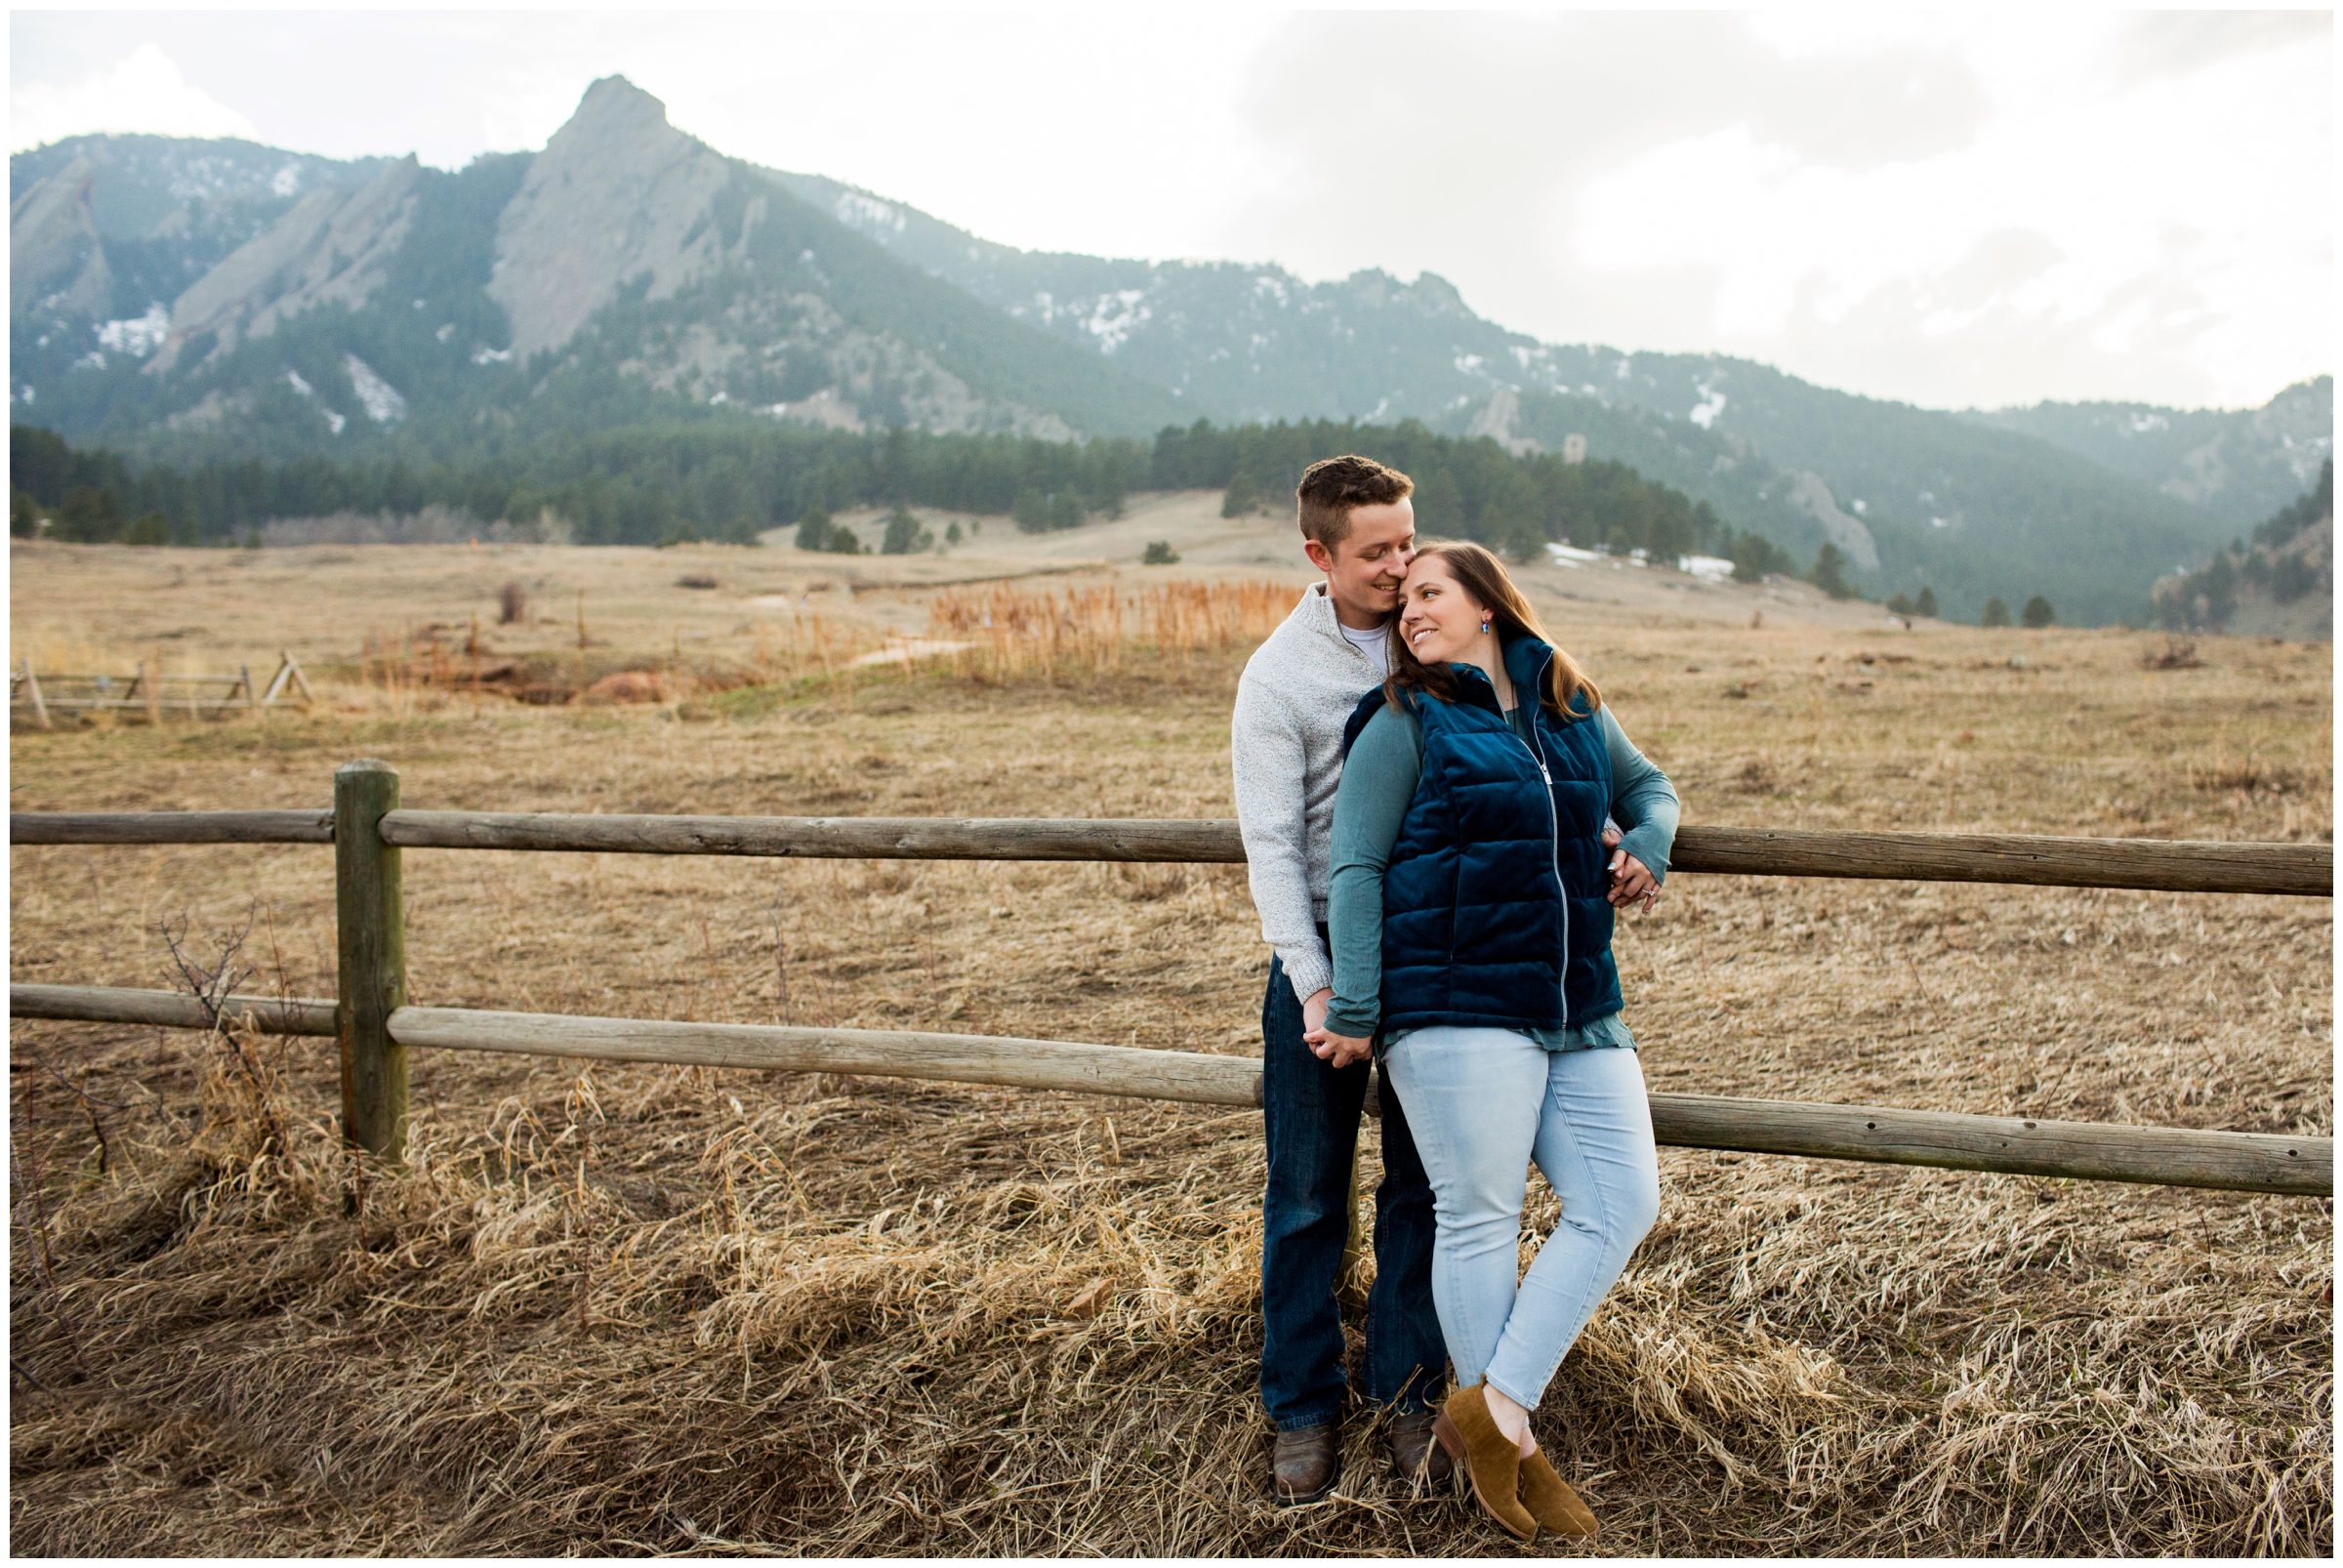 Boulder Colorado engagement pictures at Chautauqua Park and Lost Gulch Lookout by wedding photographer Plum Pretty Photography